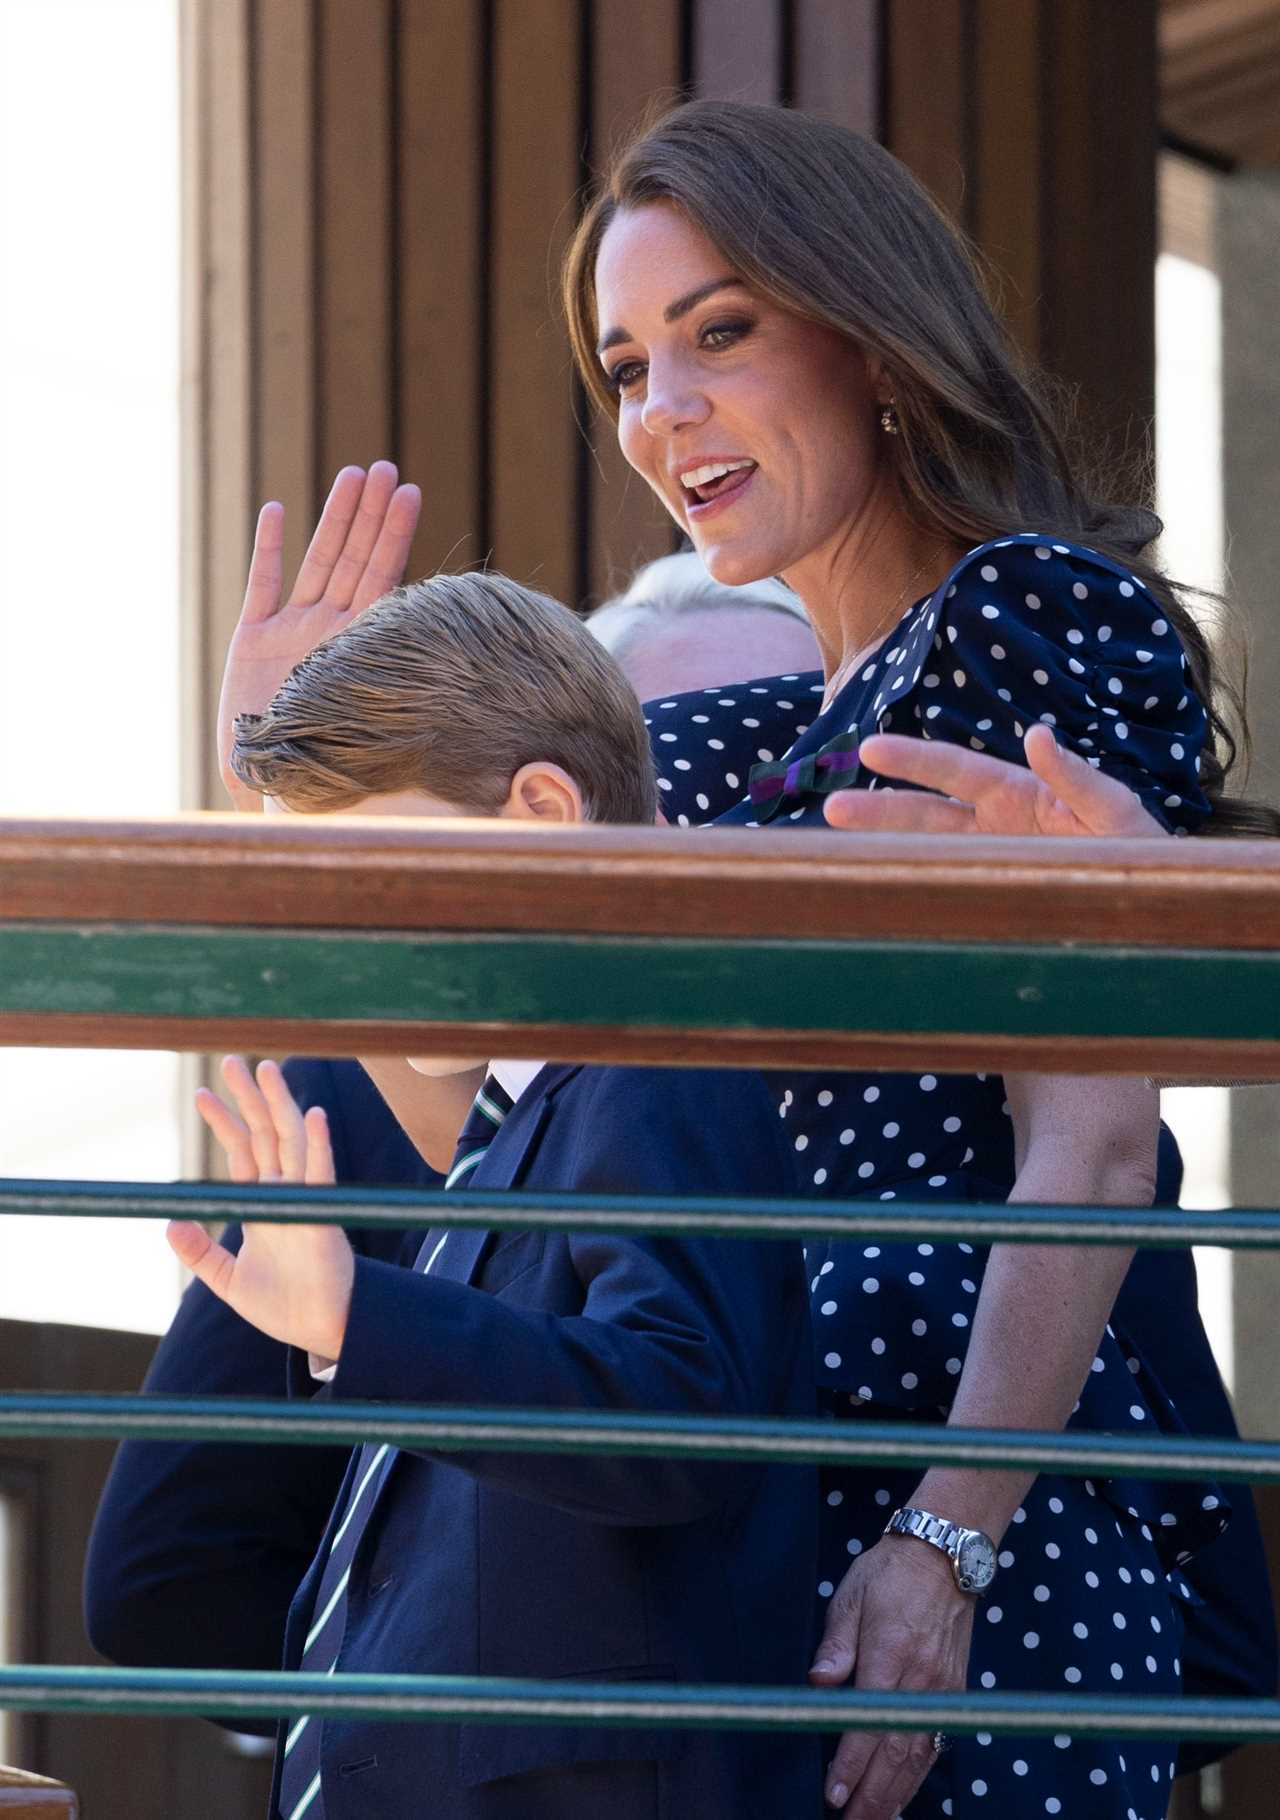 Prince George comes with Kate Middleton and William to watch Nick Kyrgios and Novak Djokovic in Wimbledon final